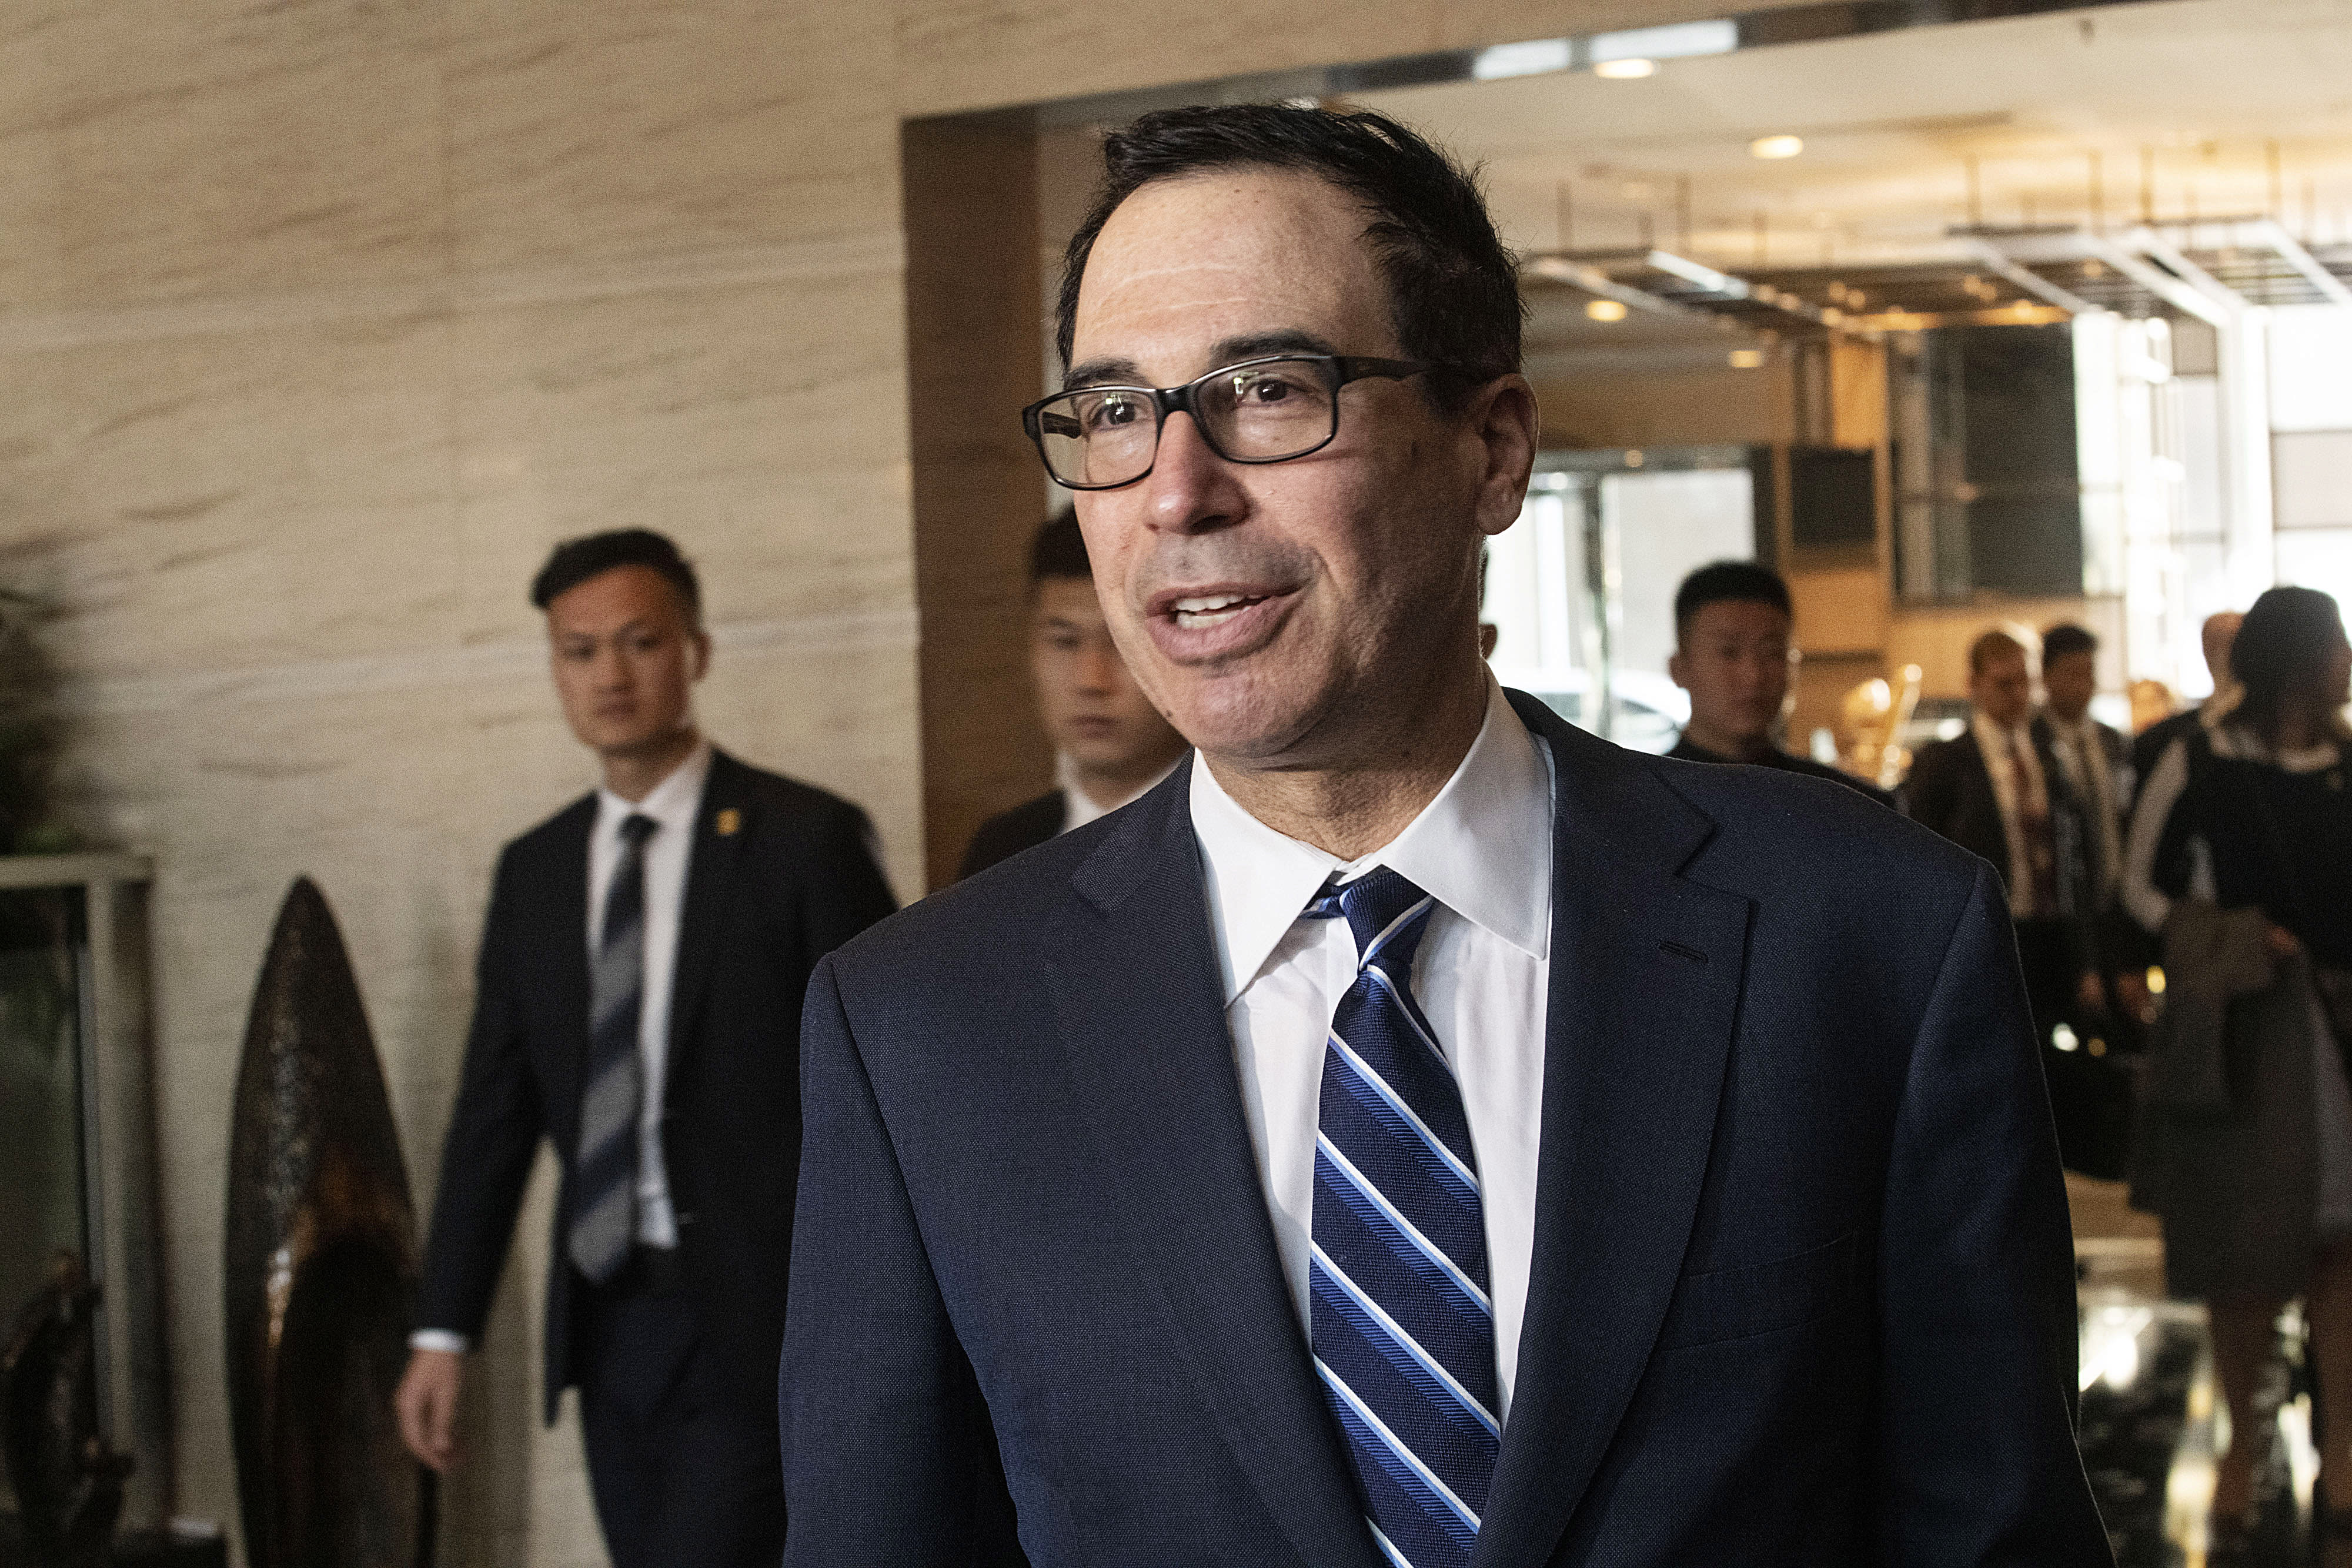 Mnuchin says Trump could do a China trade pact at anytime, but wants a 'good' deal for US workers